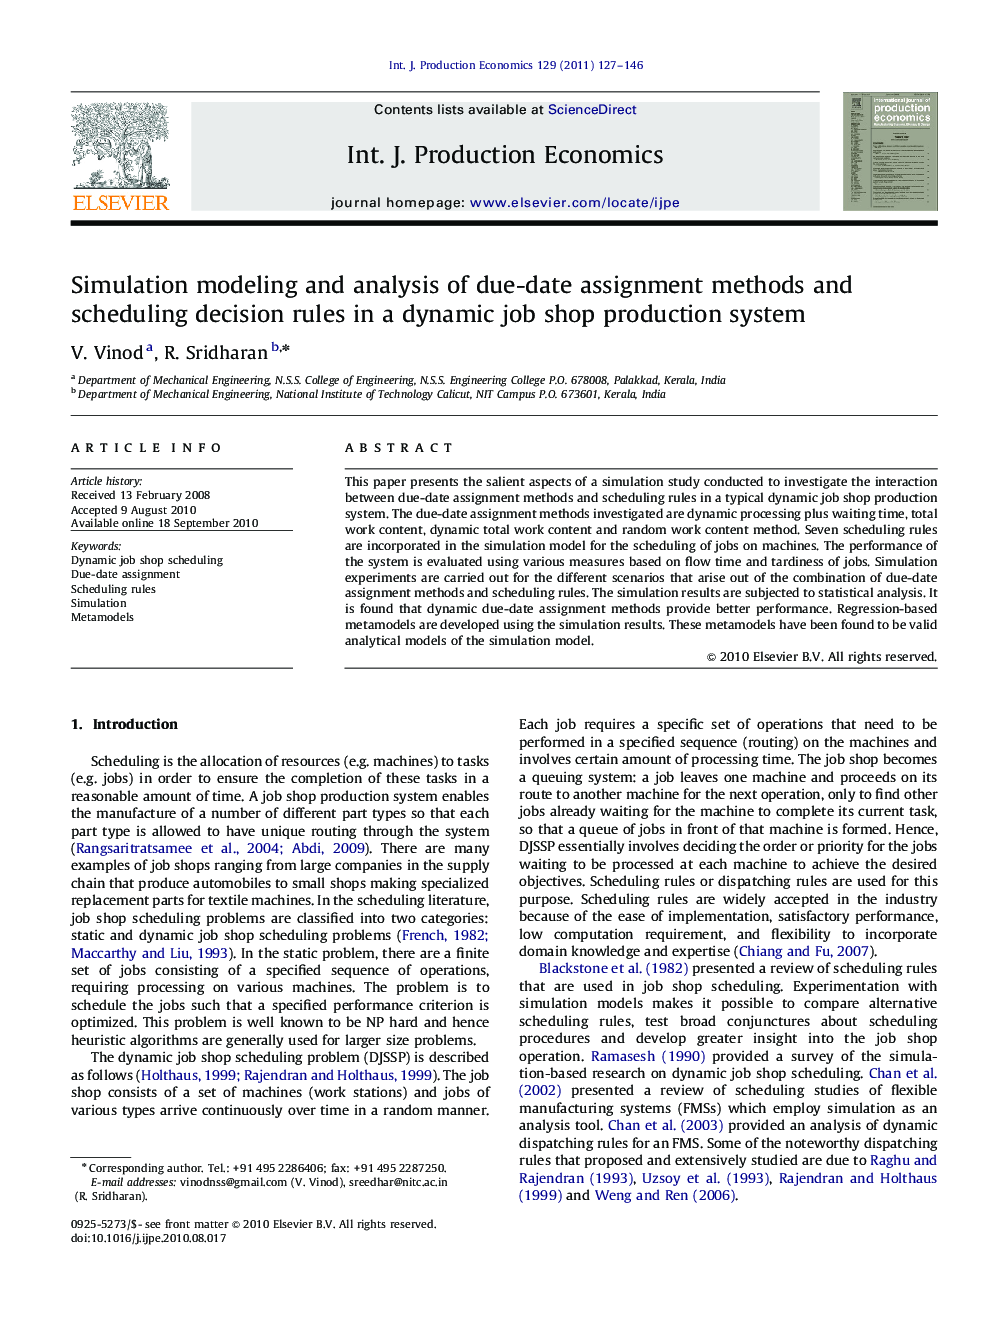 Simulation modeling and analysis of due-date assignment methods and scheduling decision rules in a dynamic job shop production system